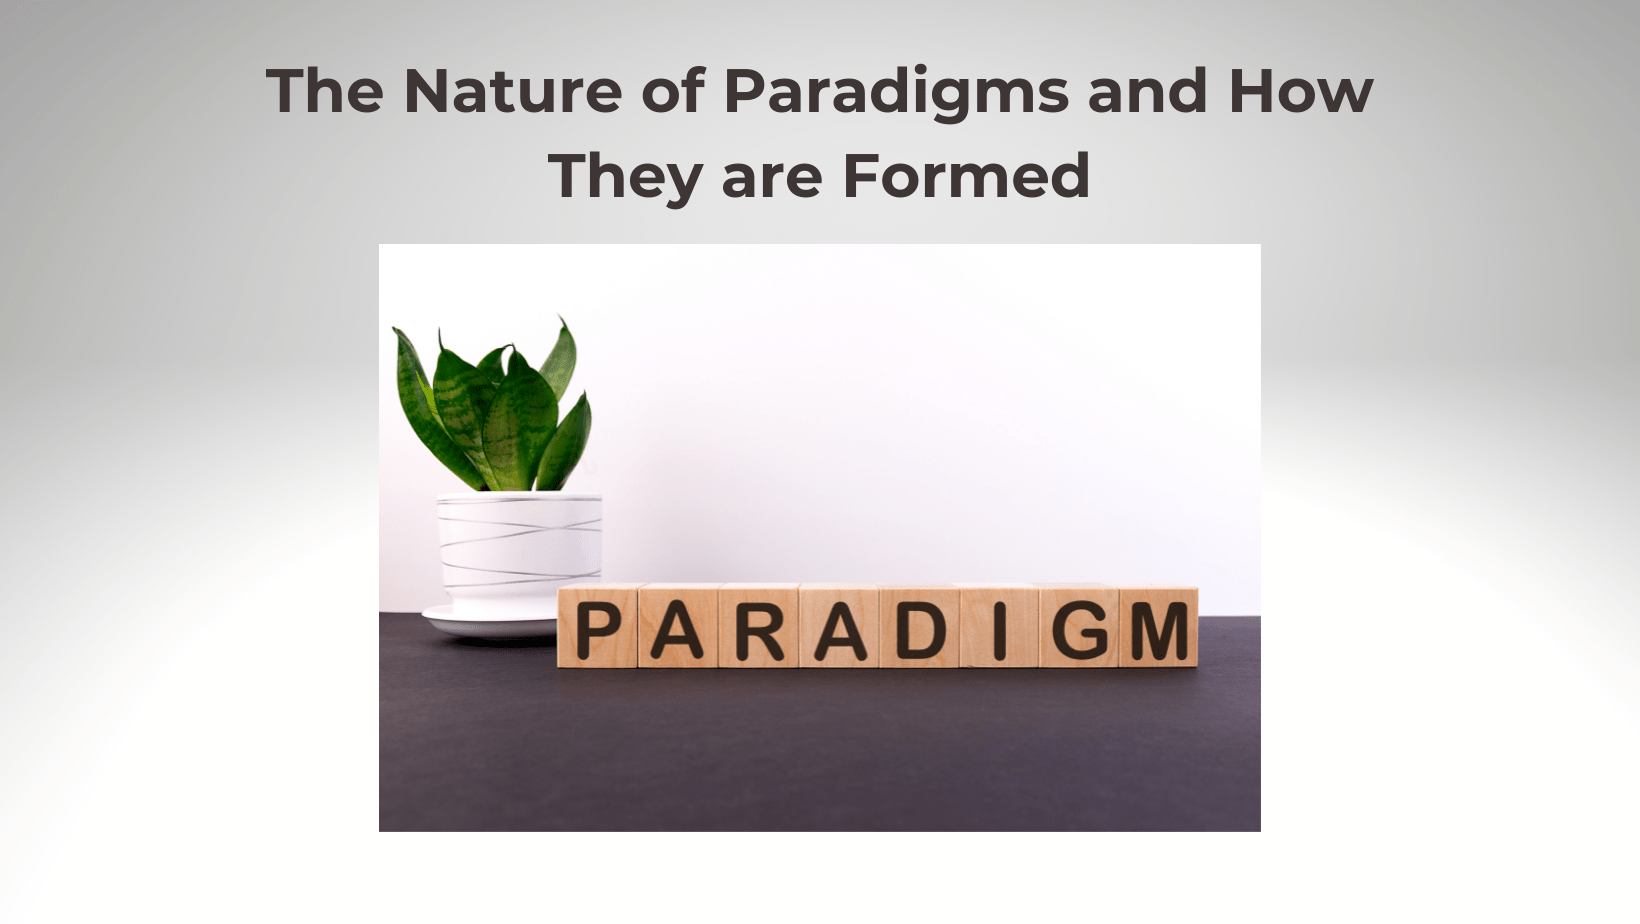 THE NATURE OF PARADIGMS AND HOW THEY ARE FORMED